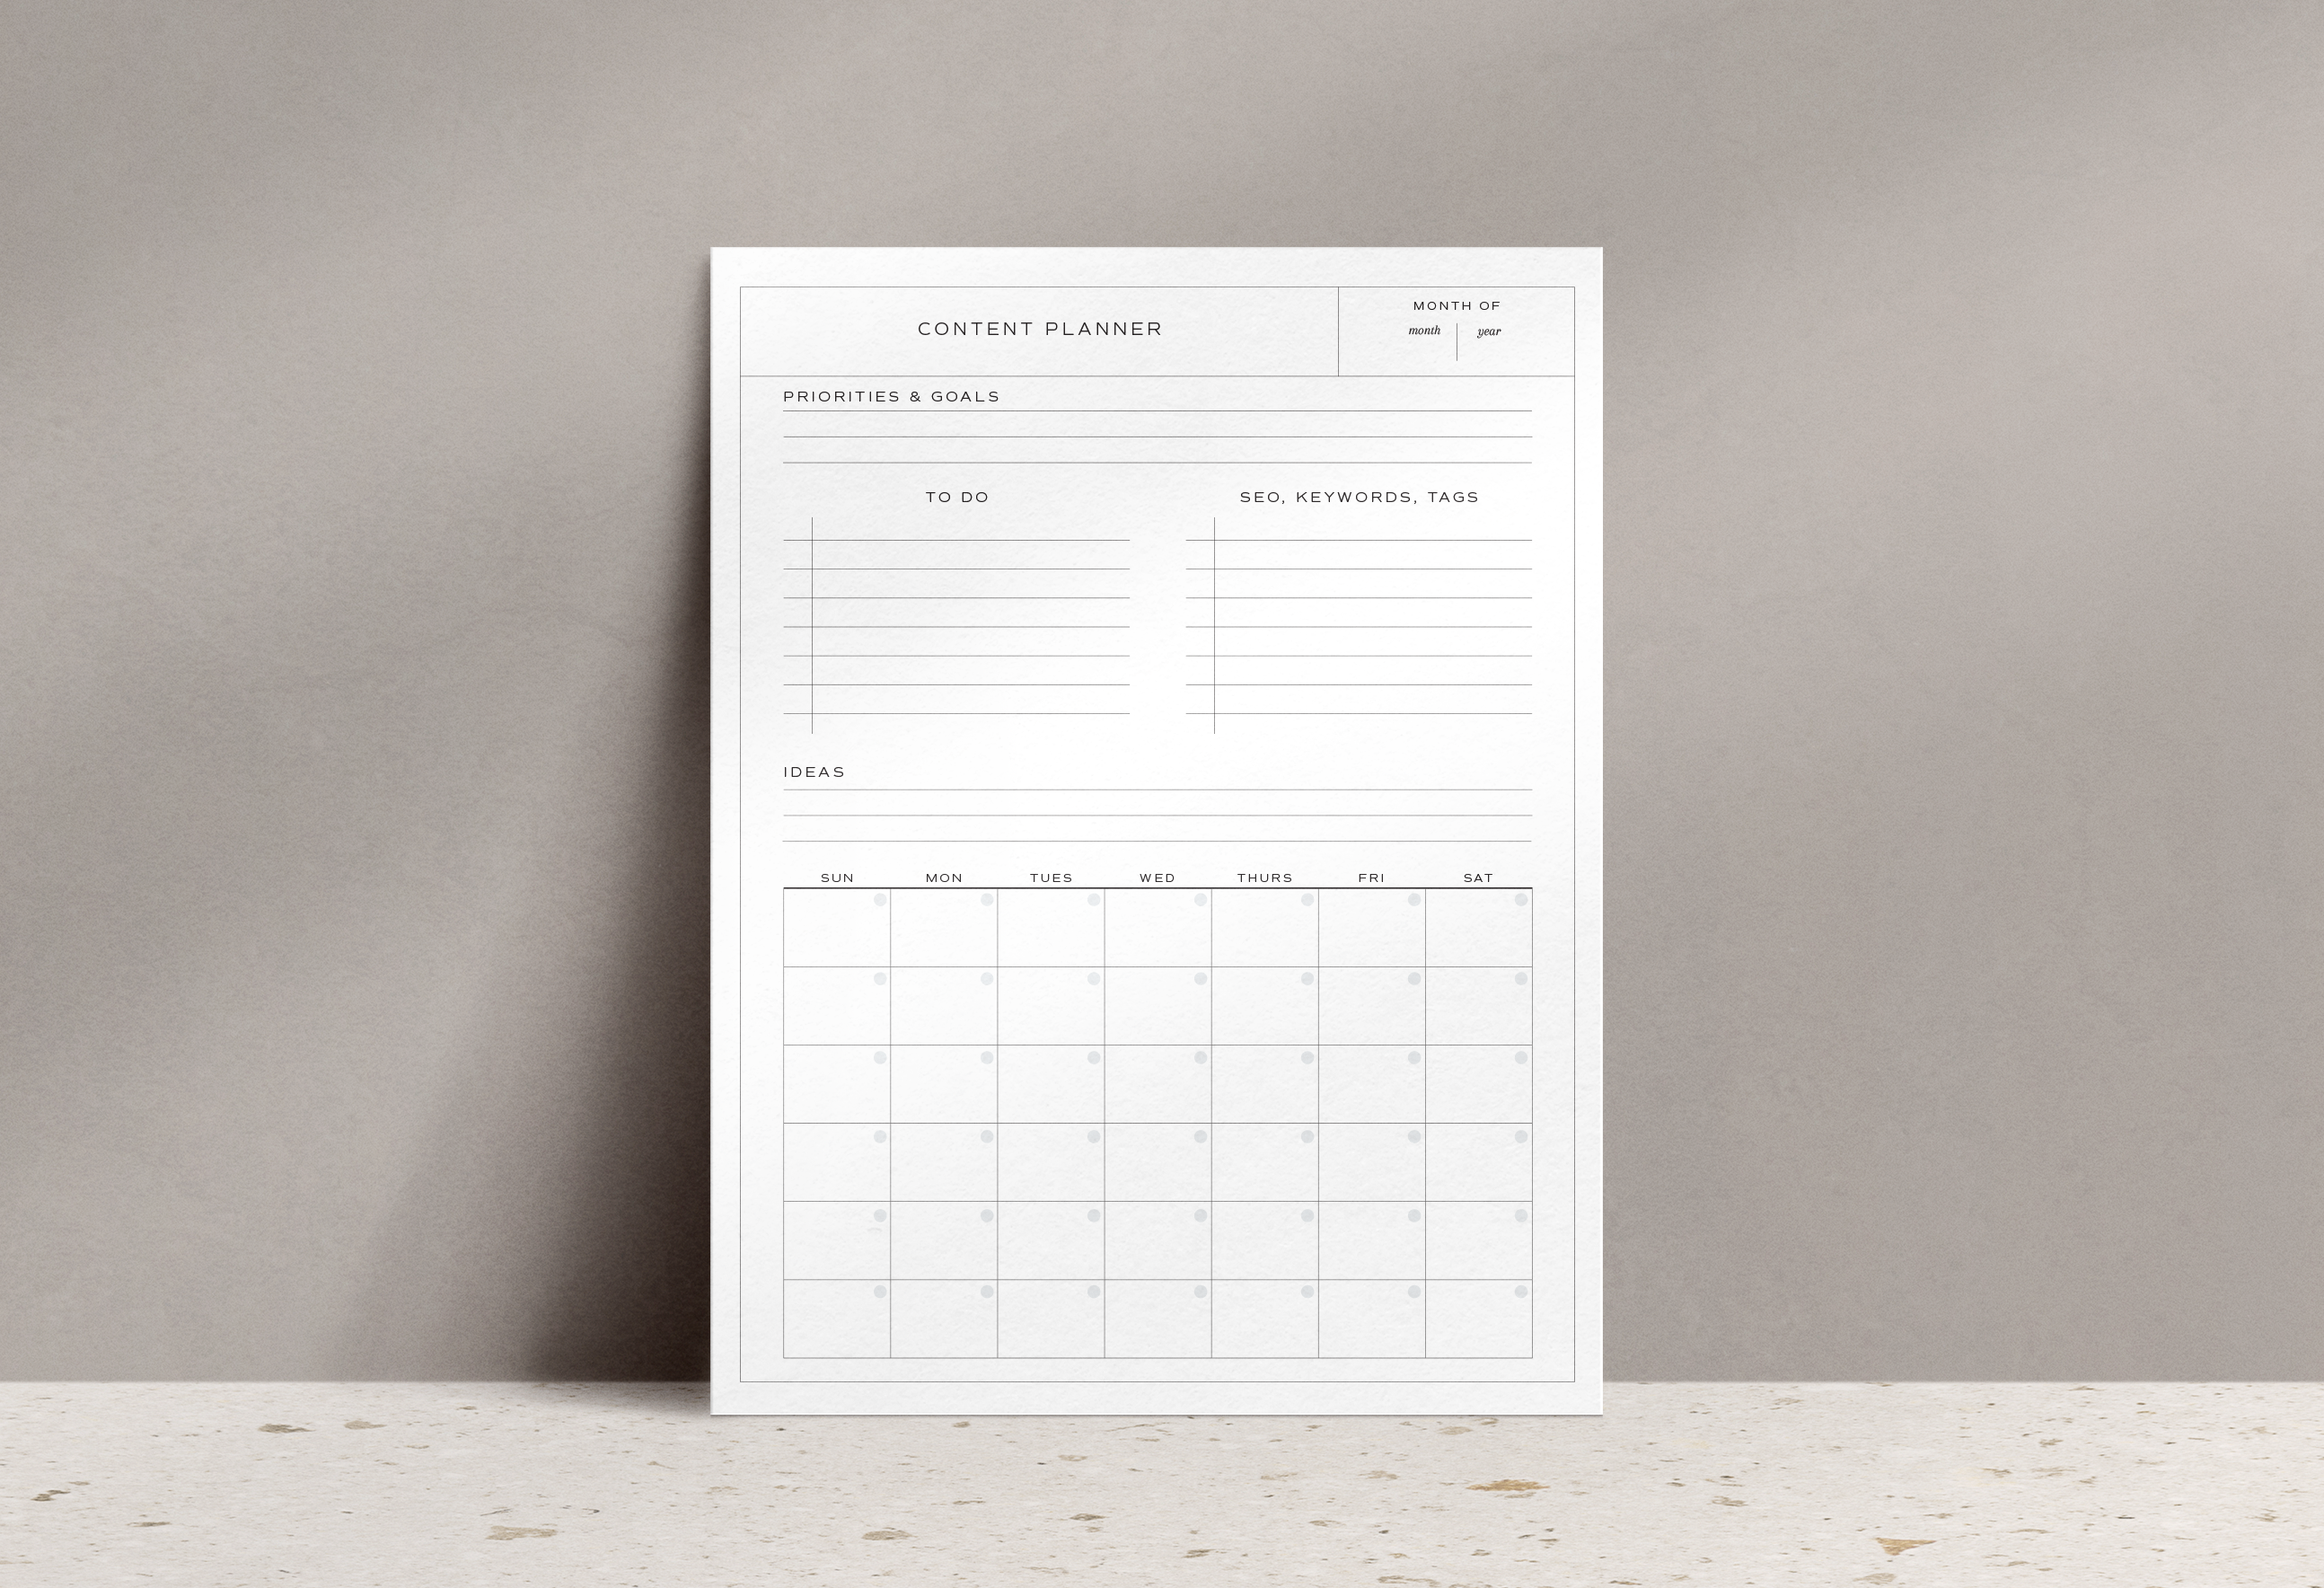 Content Planner Printable